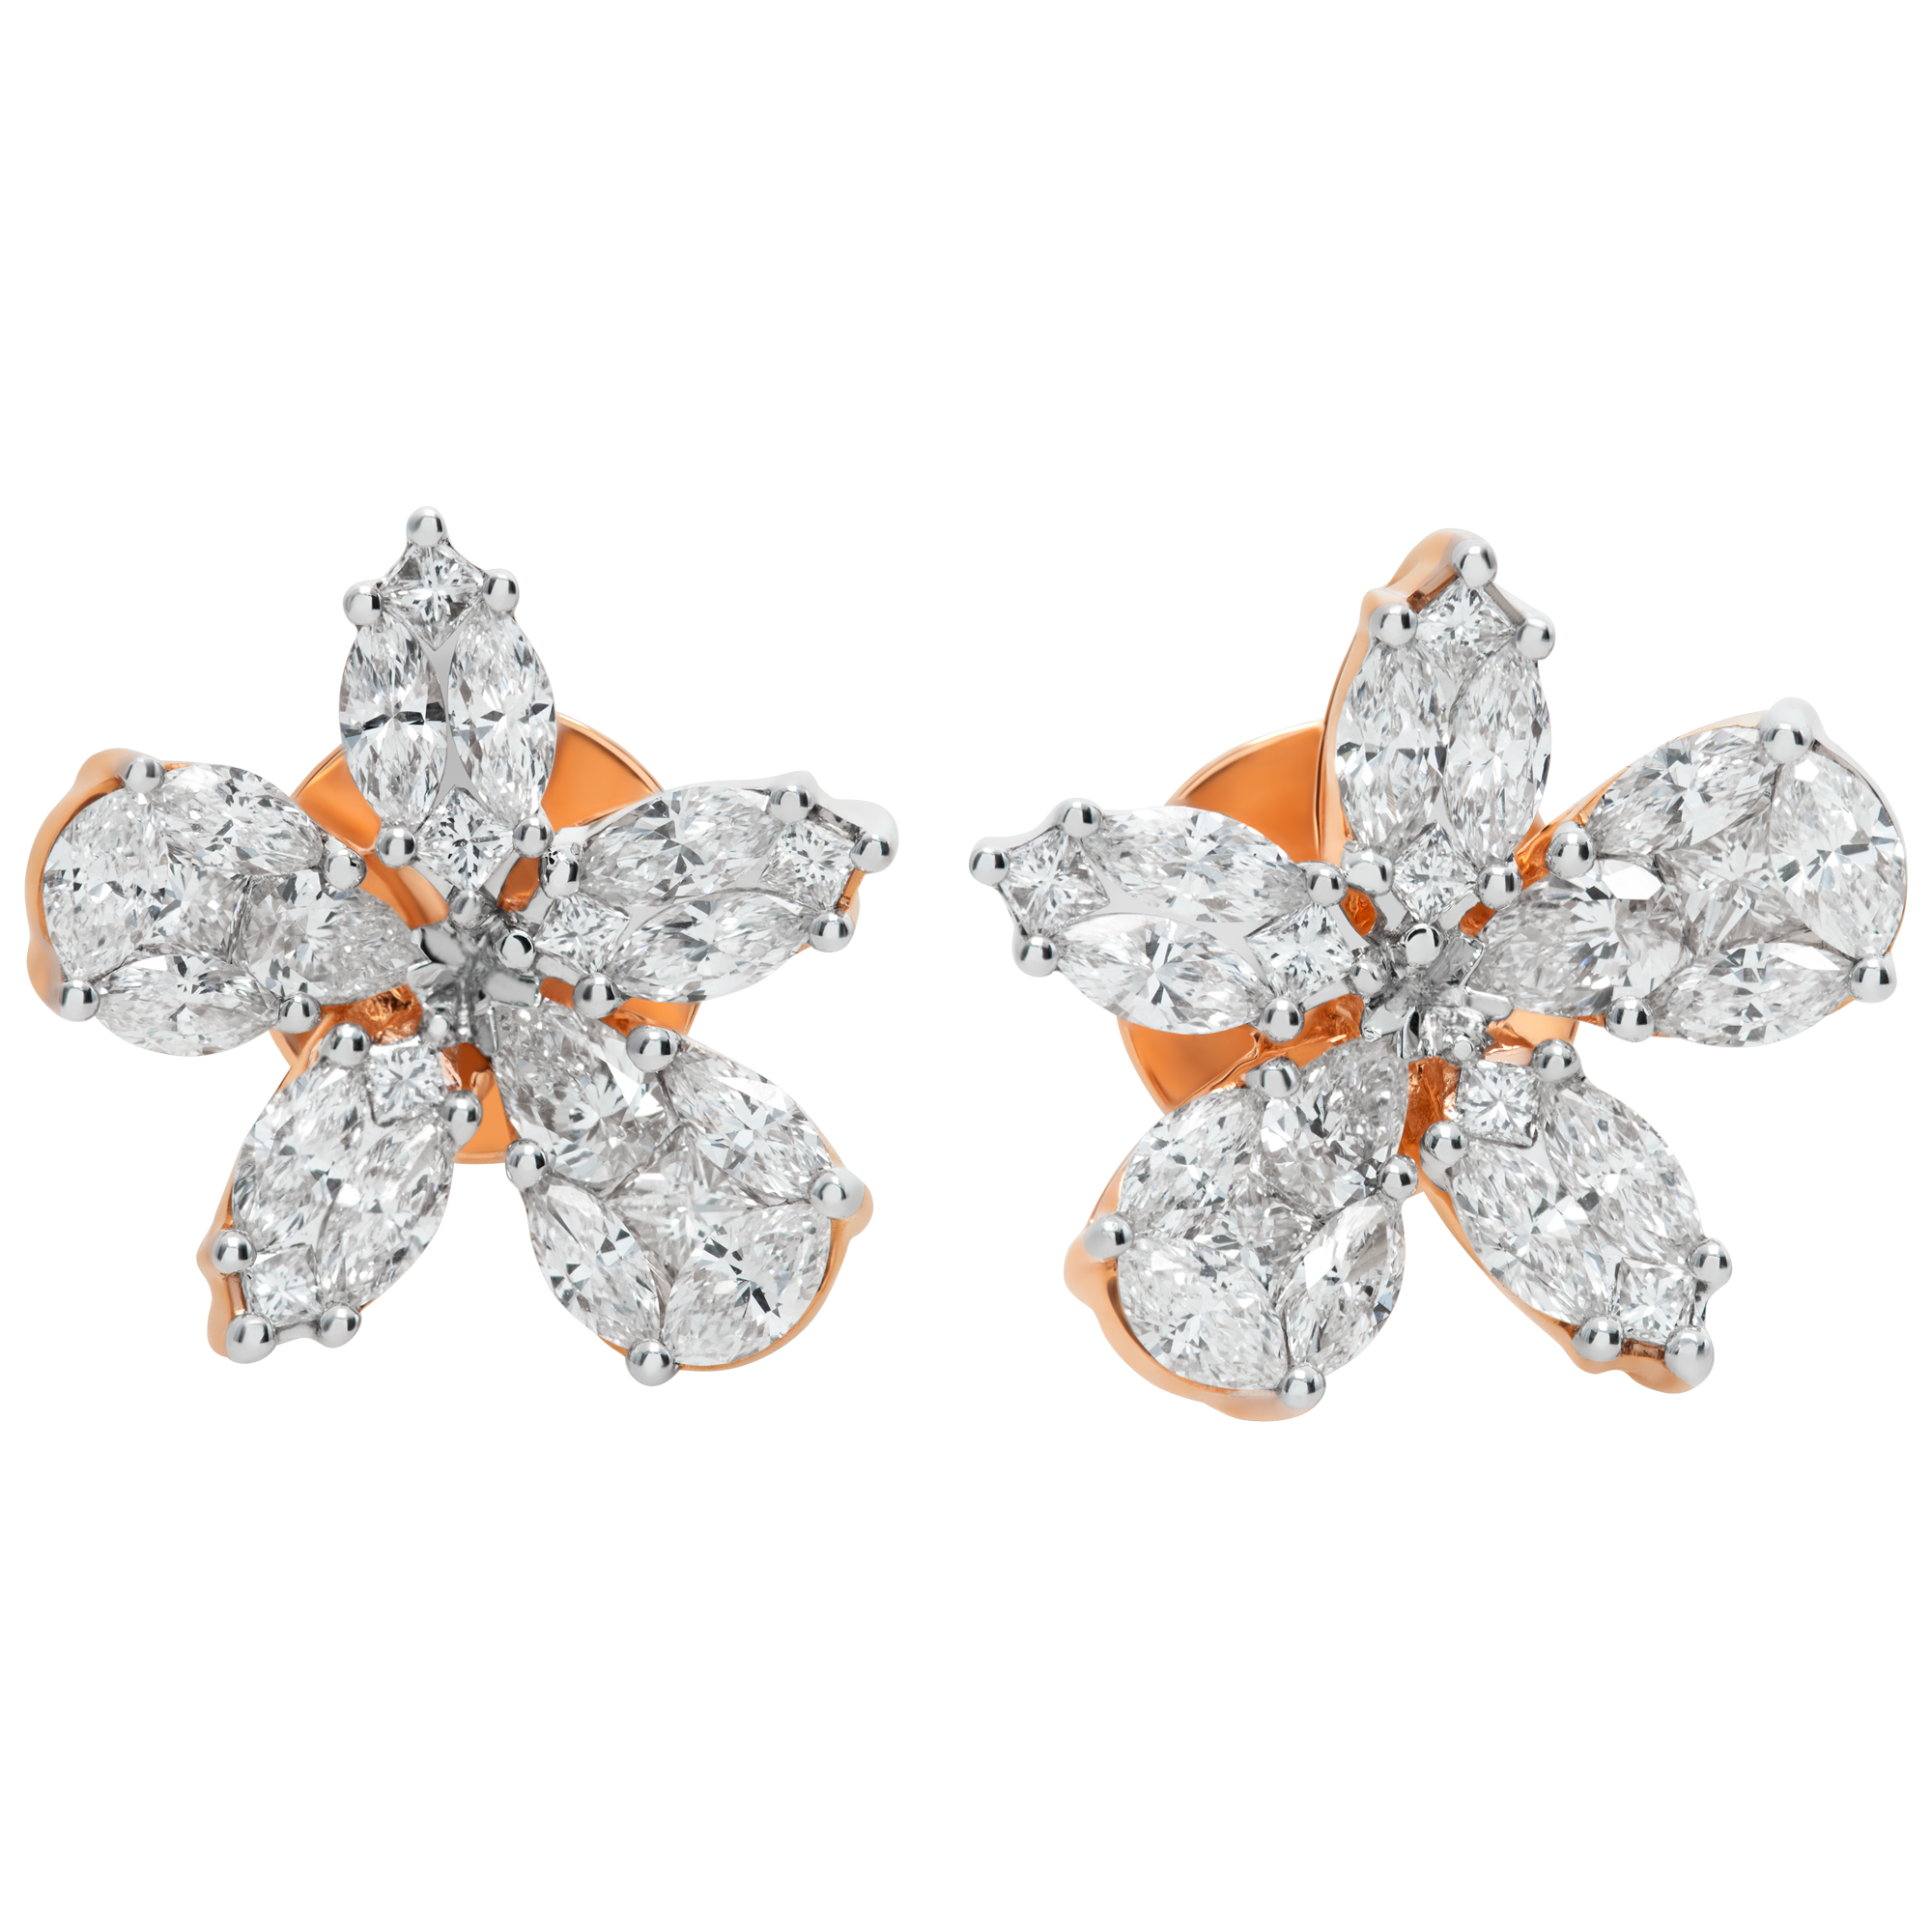 illusion set diamond flower earrings in 18k rose gold with 1.85 carats in diamonds